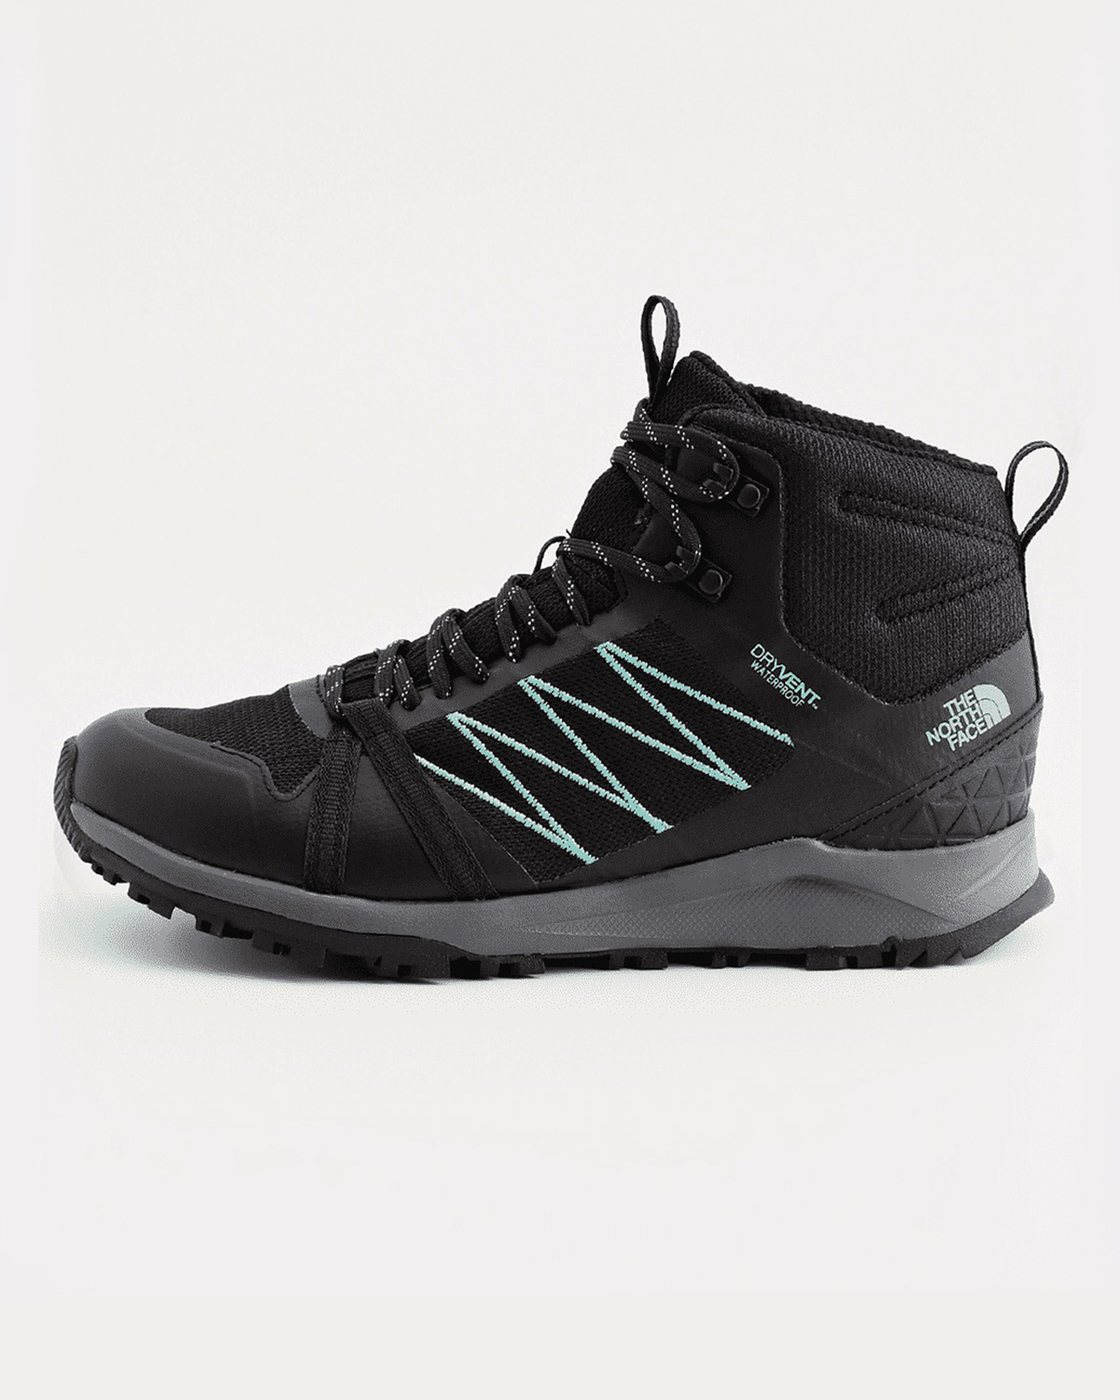 the north face litewave fastpack mid